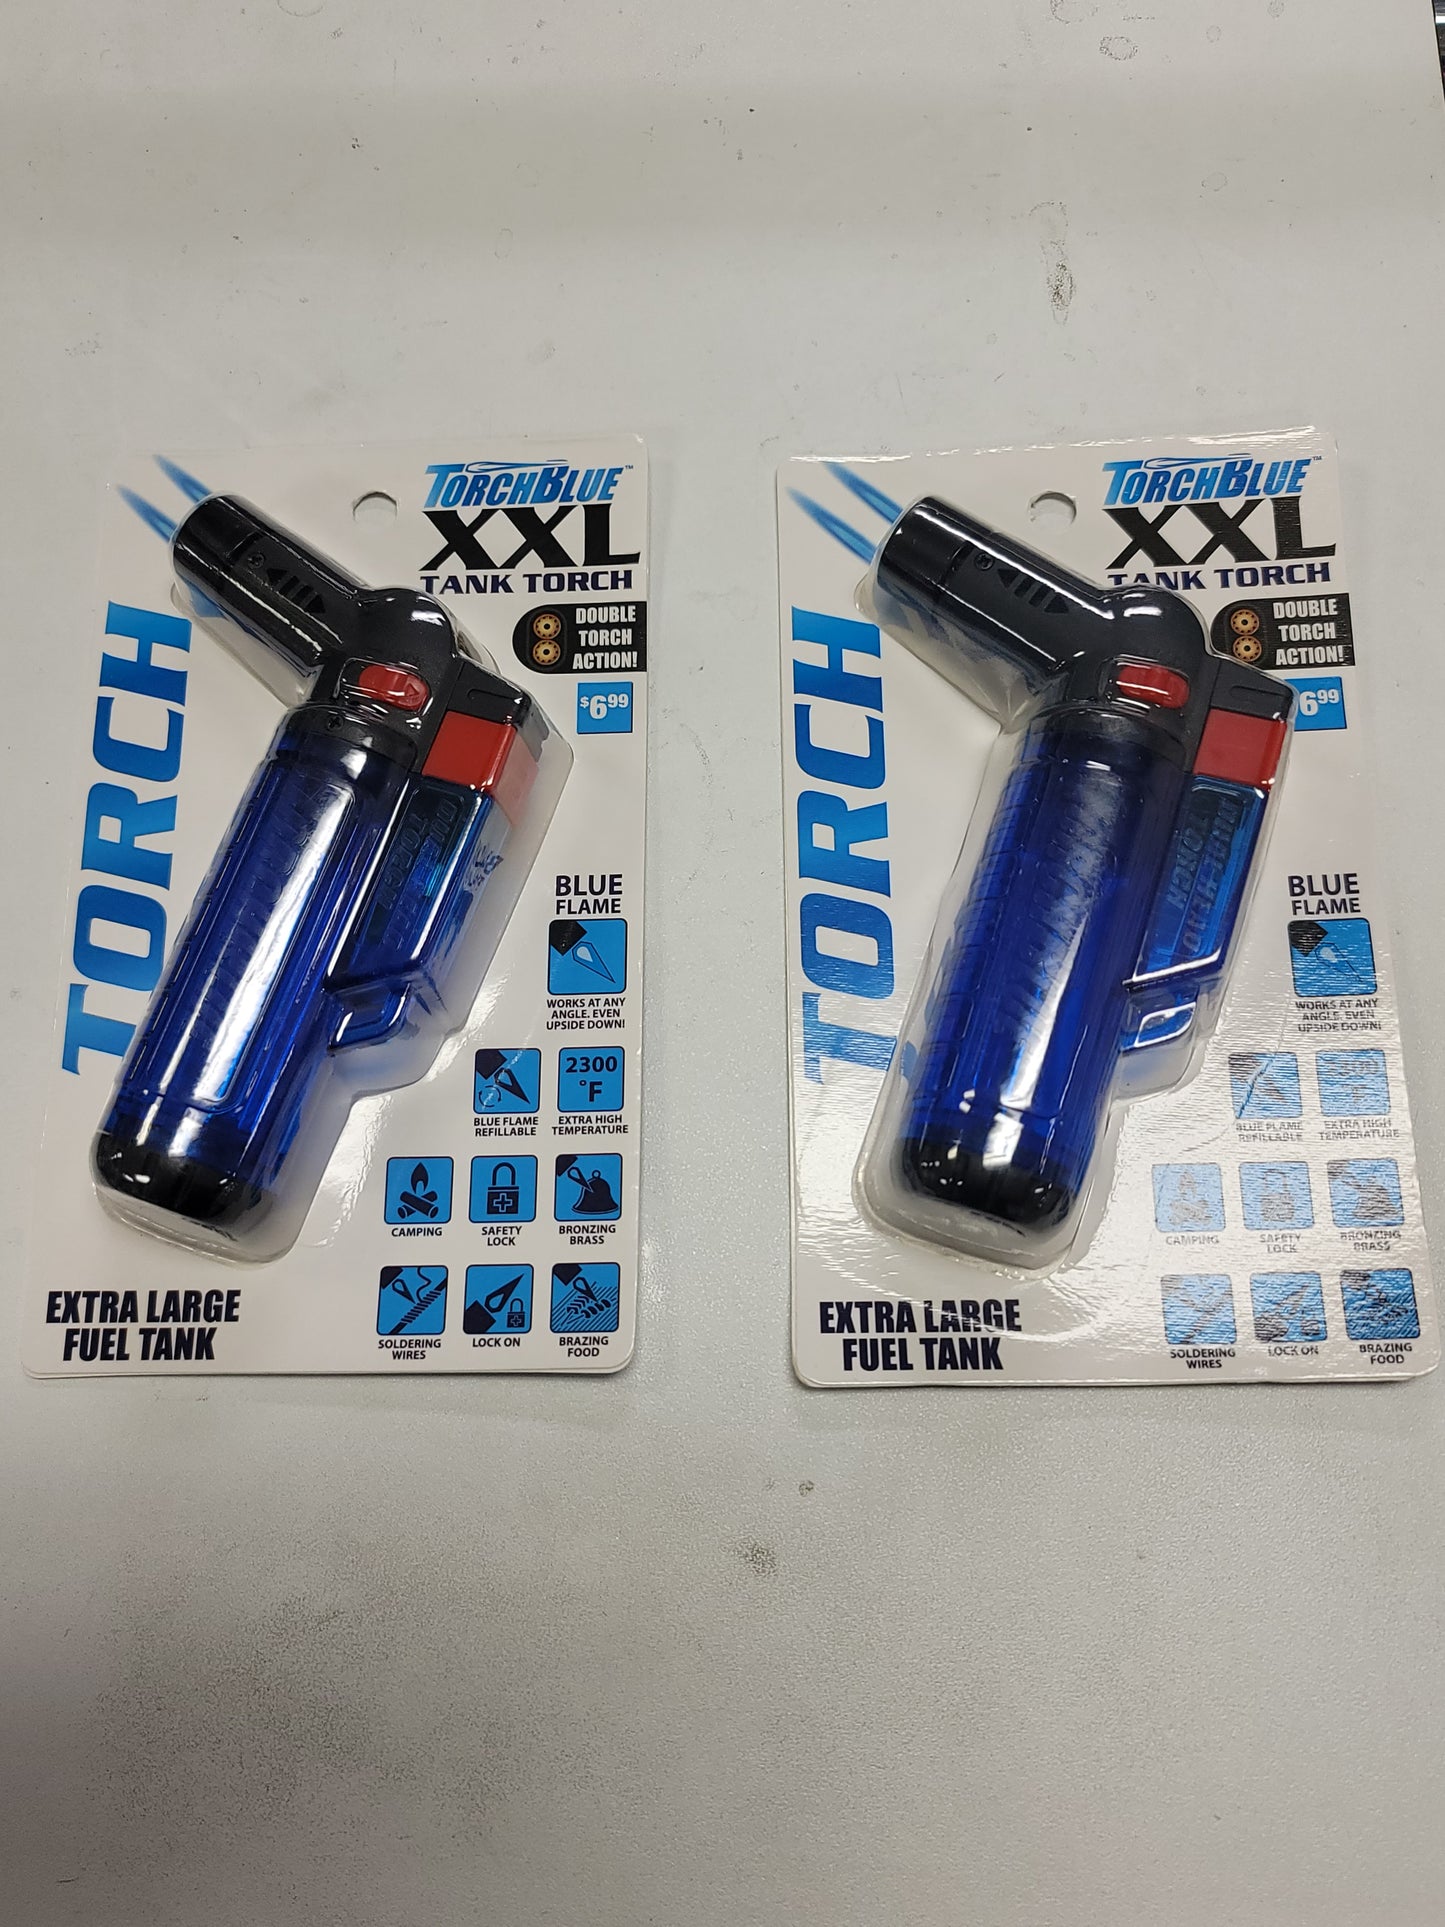 ITEM NUMBER 023354 XXL TANK TORCH 6 PIECES PER PACK